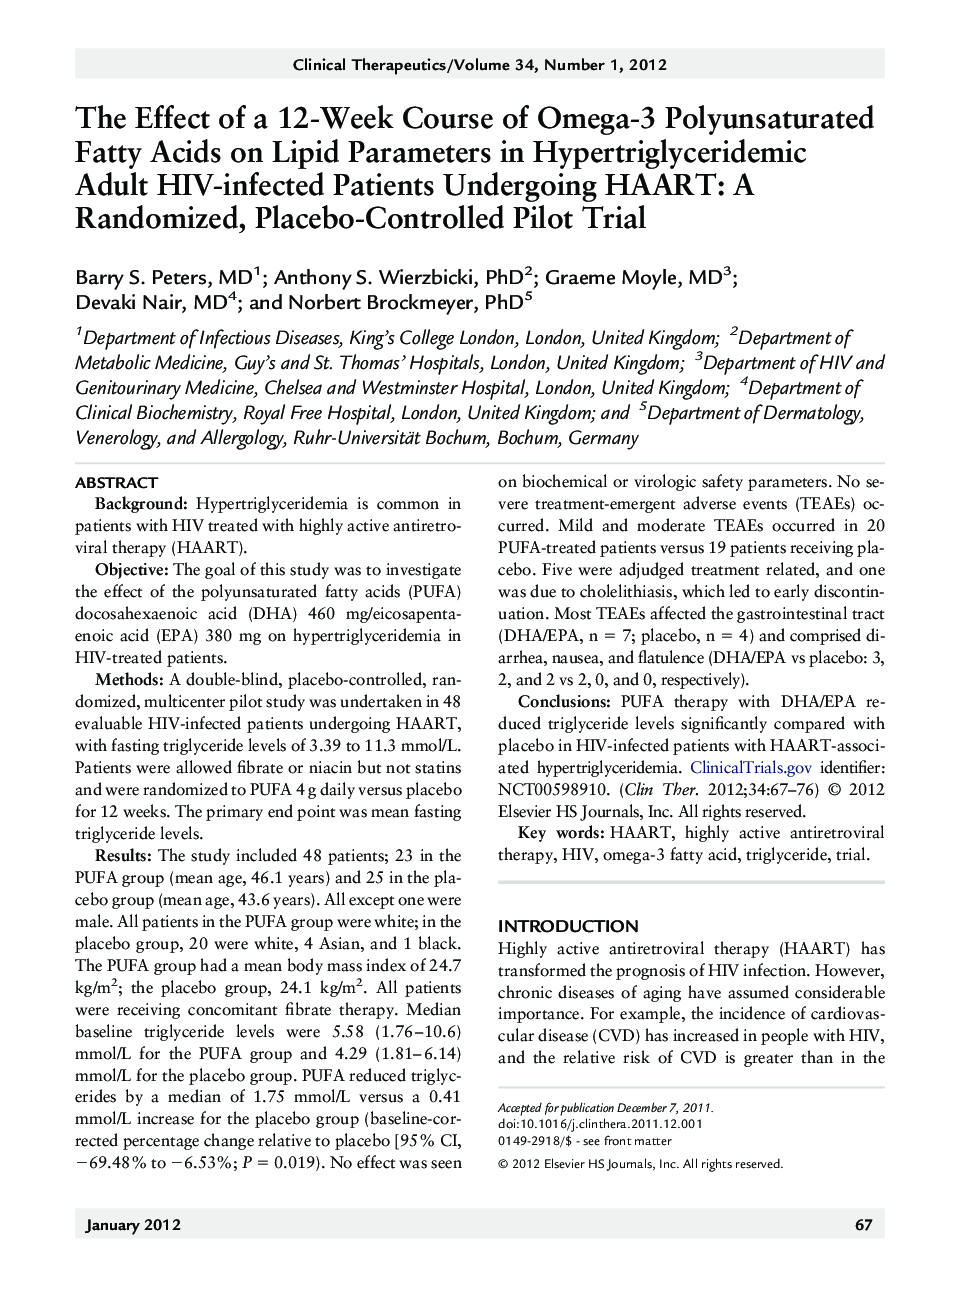 The Effect of a 12-Week Course of Omega-3 Polyunsaturated Fatty Acids on Lipid Parameters in Hypertriglyceridemic Adult HIV-infected Patients Undergoing HAART: A Randomized, Placebo-Controlled Pilot Trial